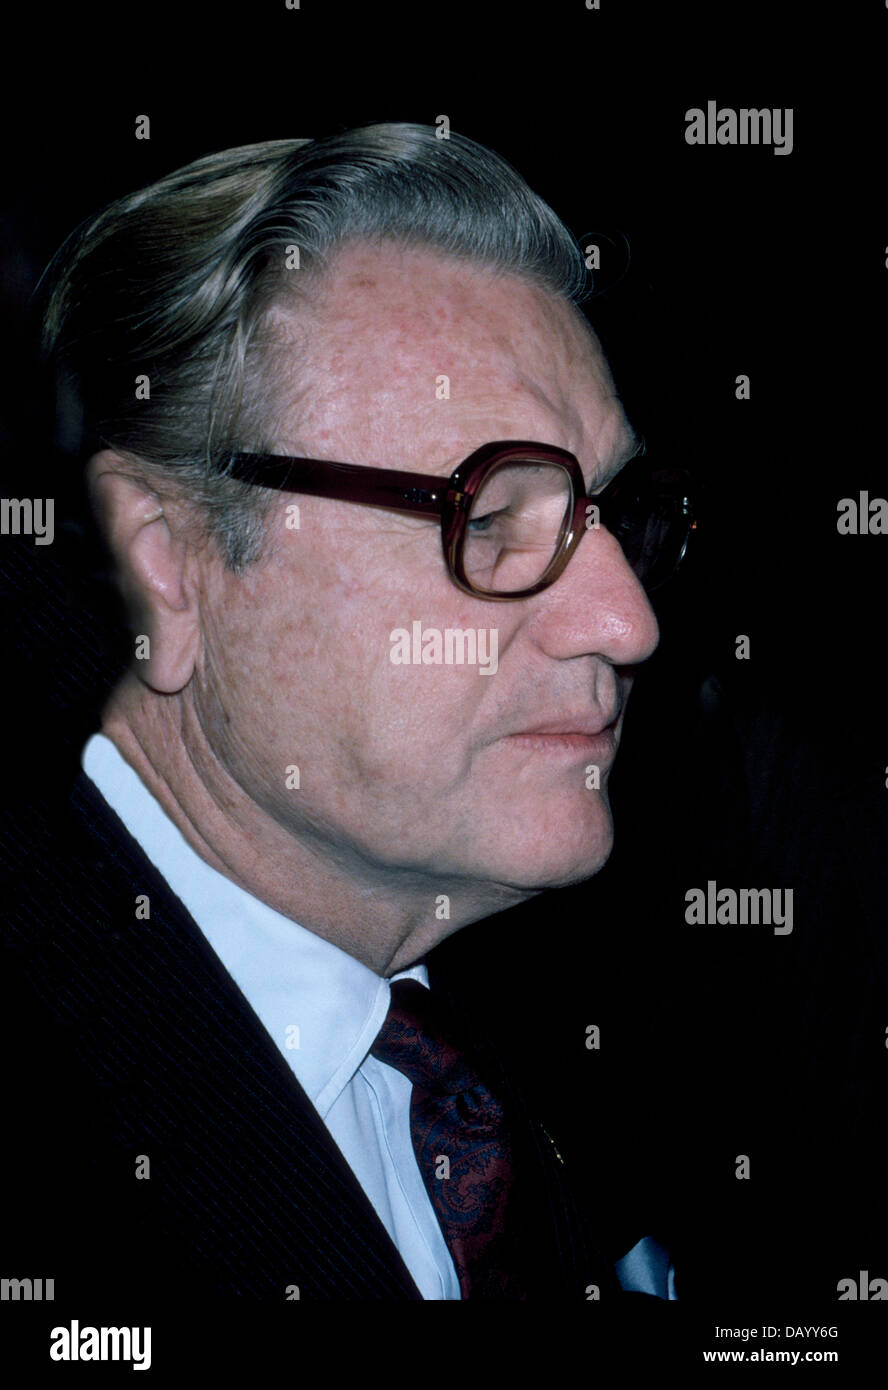 Nelson A. Rockefeller photographed in 1976 in Washington, D.C., USA, during his term as the 41st Vice President of the United States (1974-77). Stock Photo